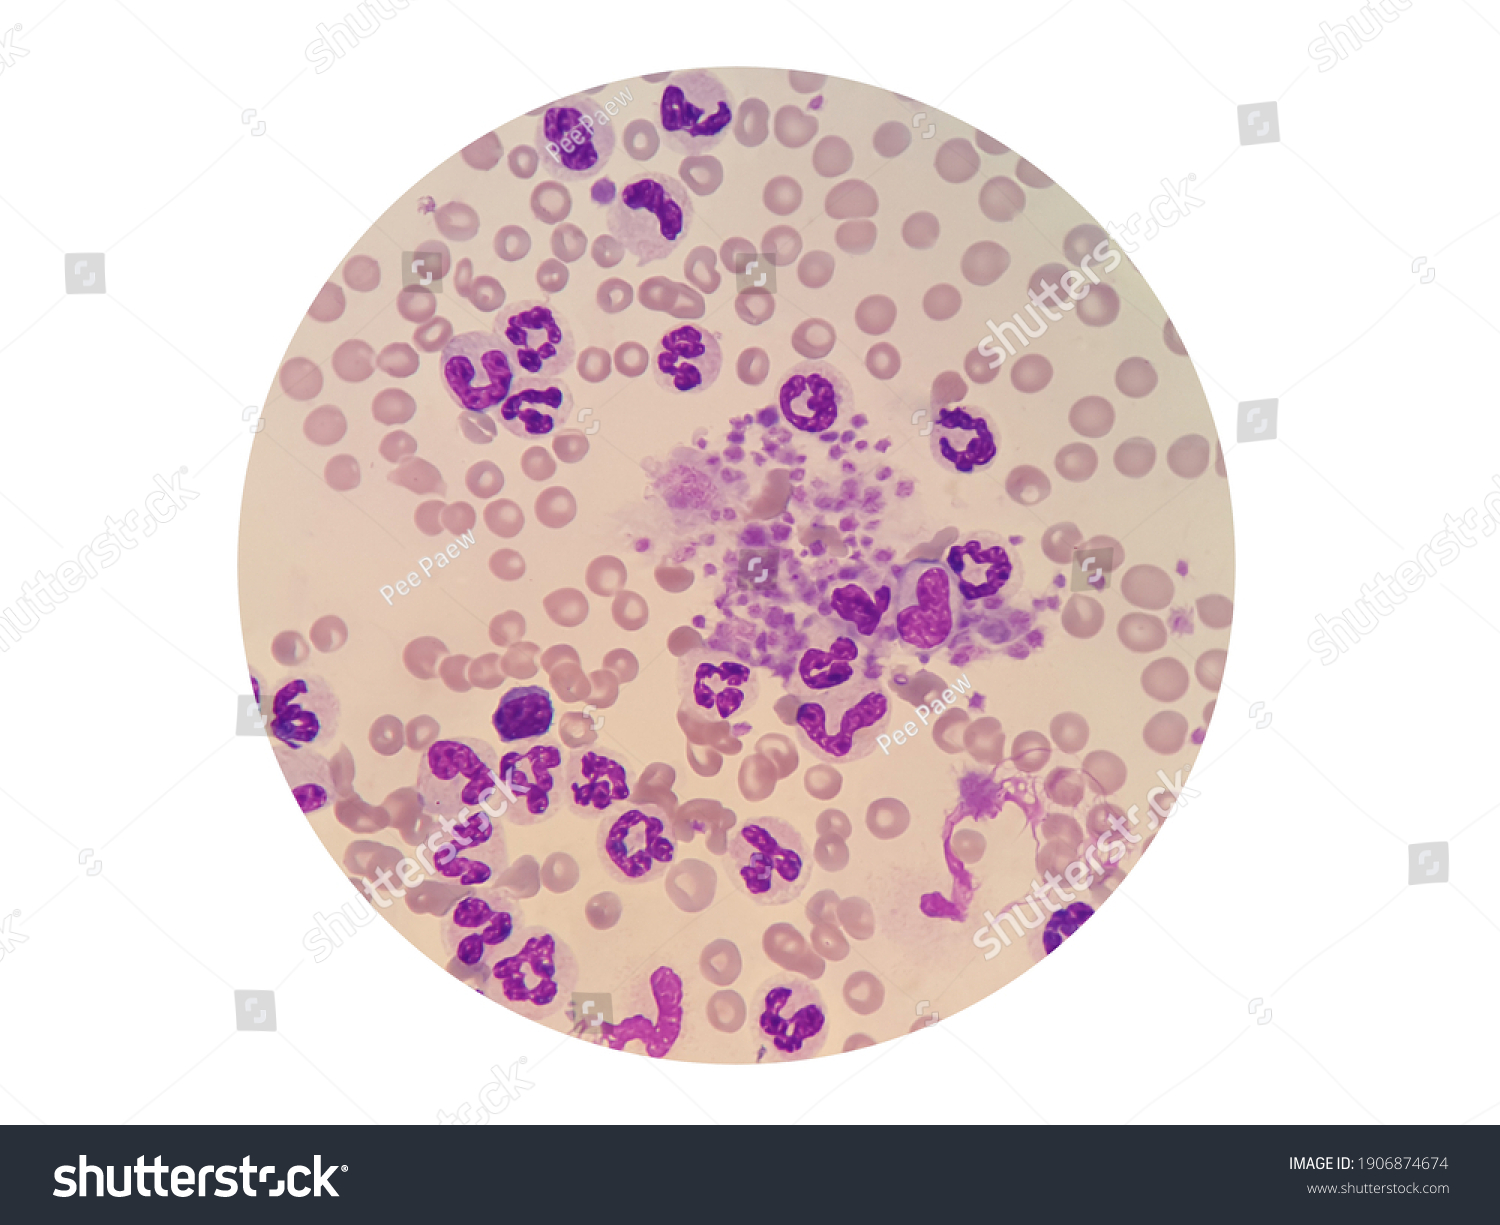 165 Platelet clumping 이미지 스톡 사진 및 벡터 Shutterstock